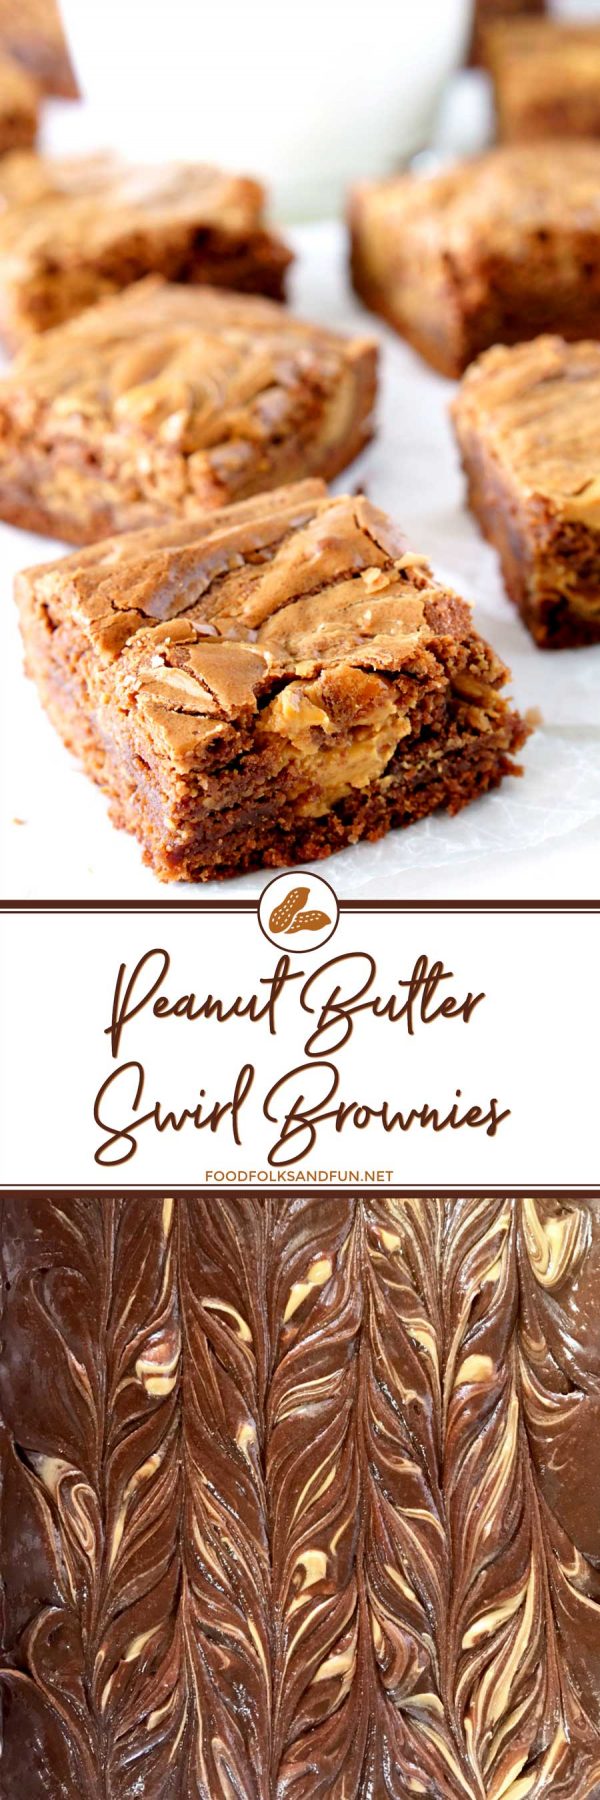 Brownie Recipe with Peanut Butter Swirl - so easy and SO good!